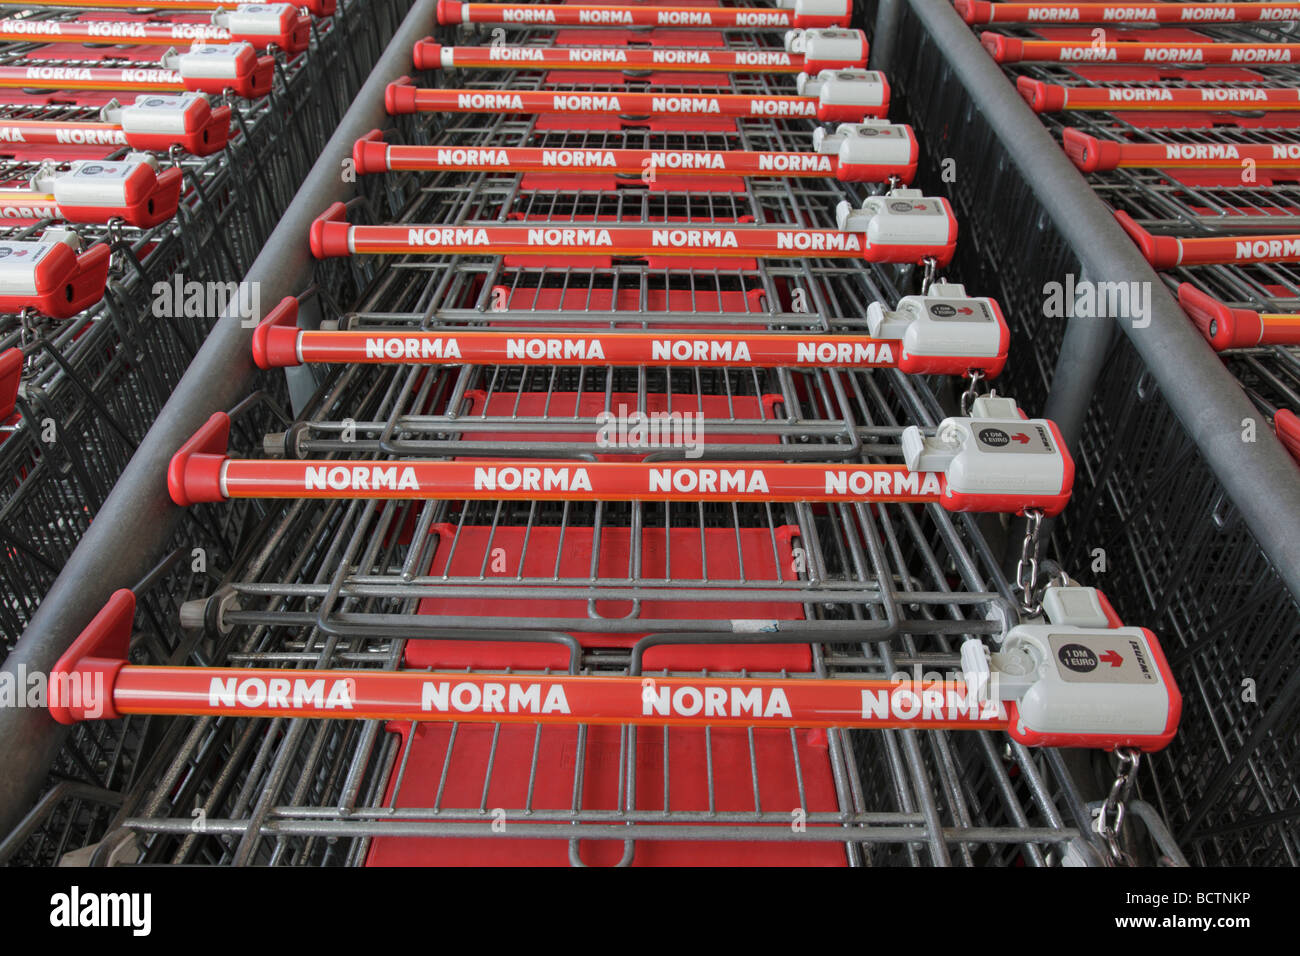 handles of Norma shopping carts in Germany, Europe. Photo by Willy Matheisl Stock Photo